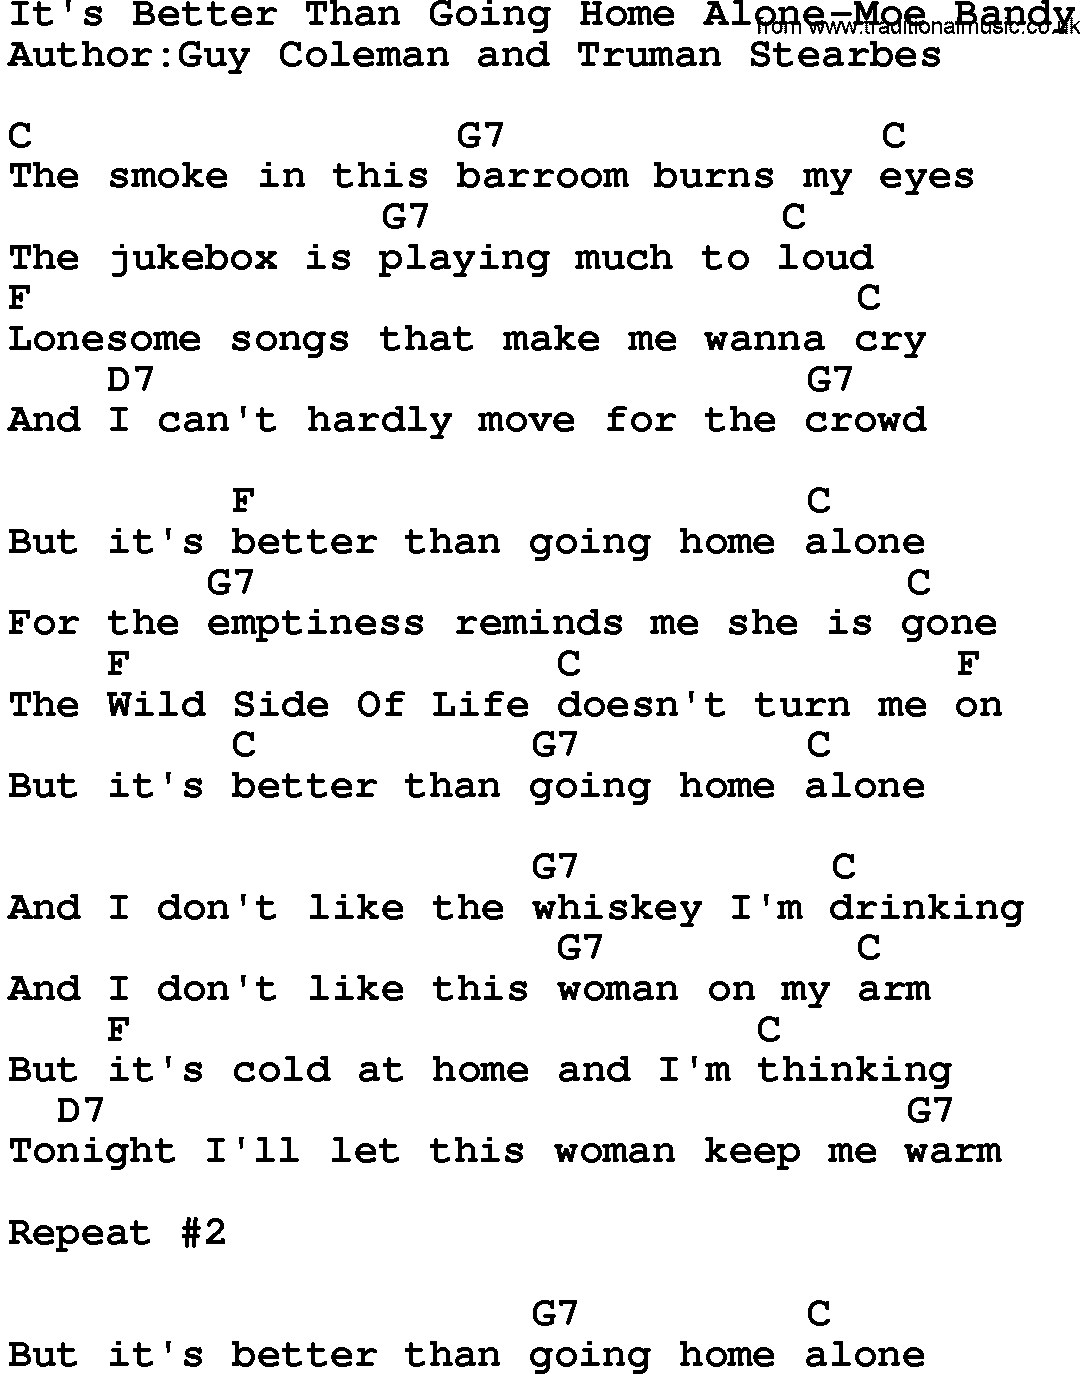 Country music song: It's Better Than Going Home Alone-Moe Bandy lyrics and chords